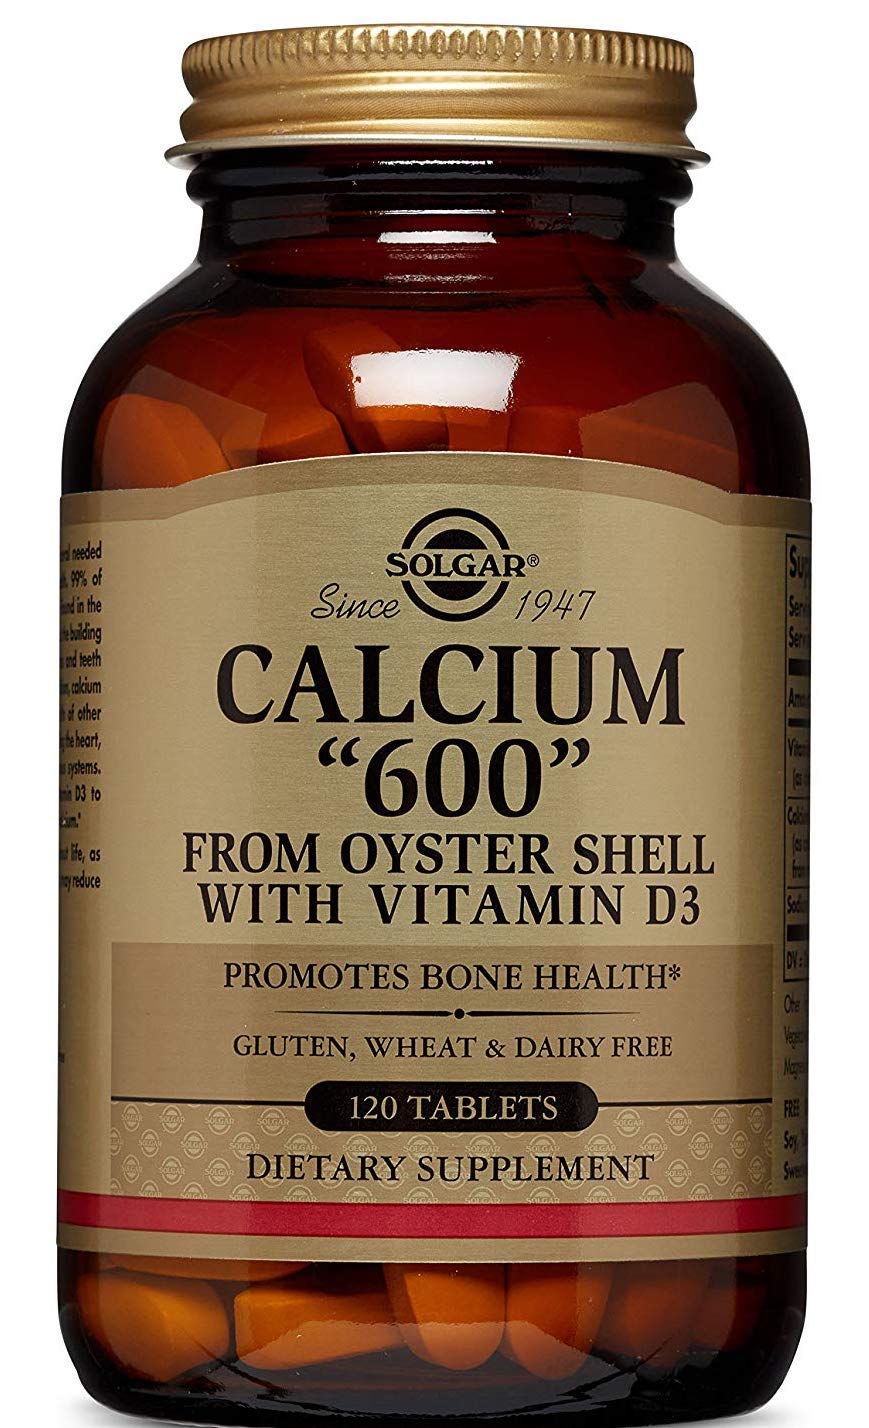 Solgar Calcium 600 from Oyster Shell with Vitamin D3, , 60 pcs